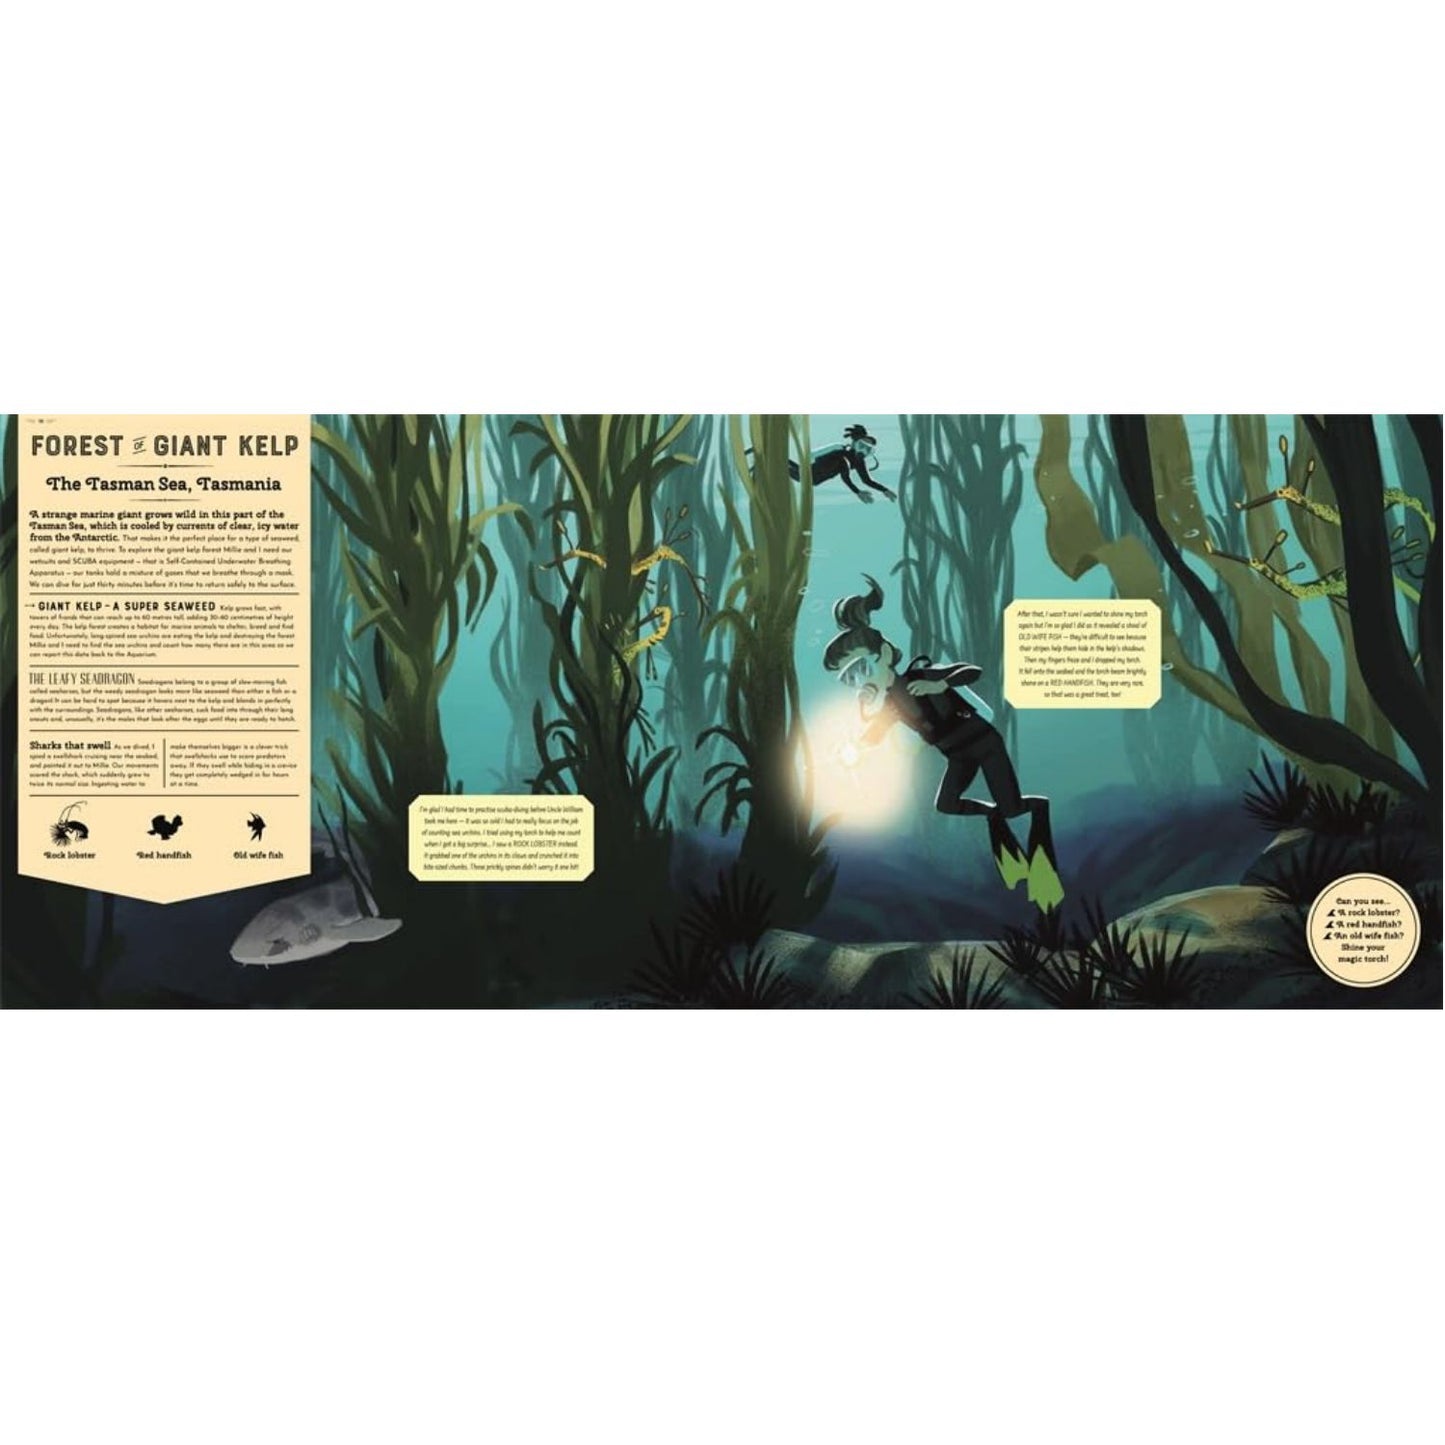 Mysteries of the Ocean: Includes Magic Torch Which Illuminates More Than 50 Marine Animals | Children's Book on Sea Life